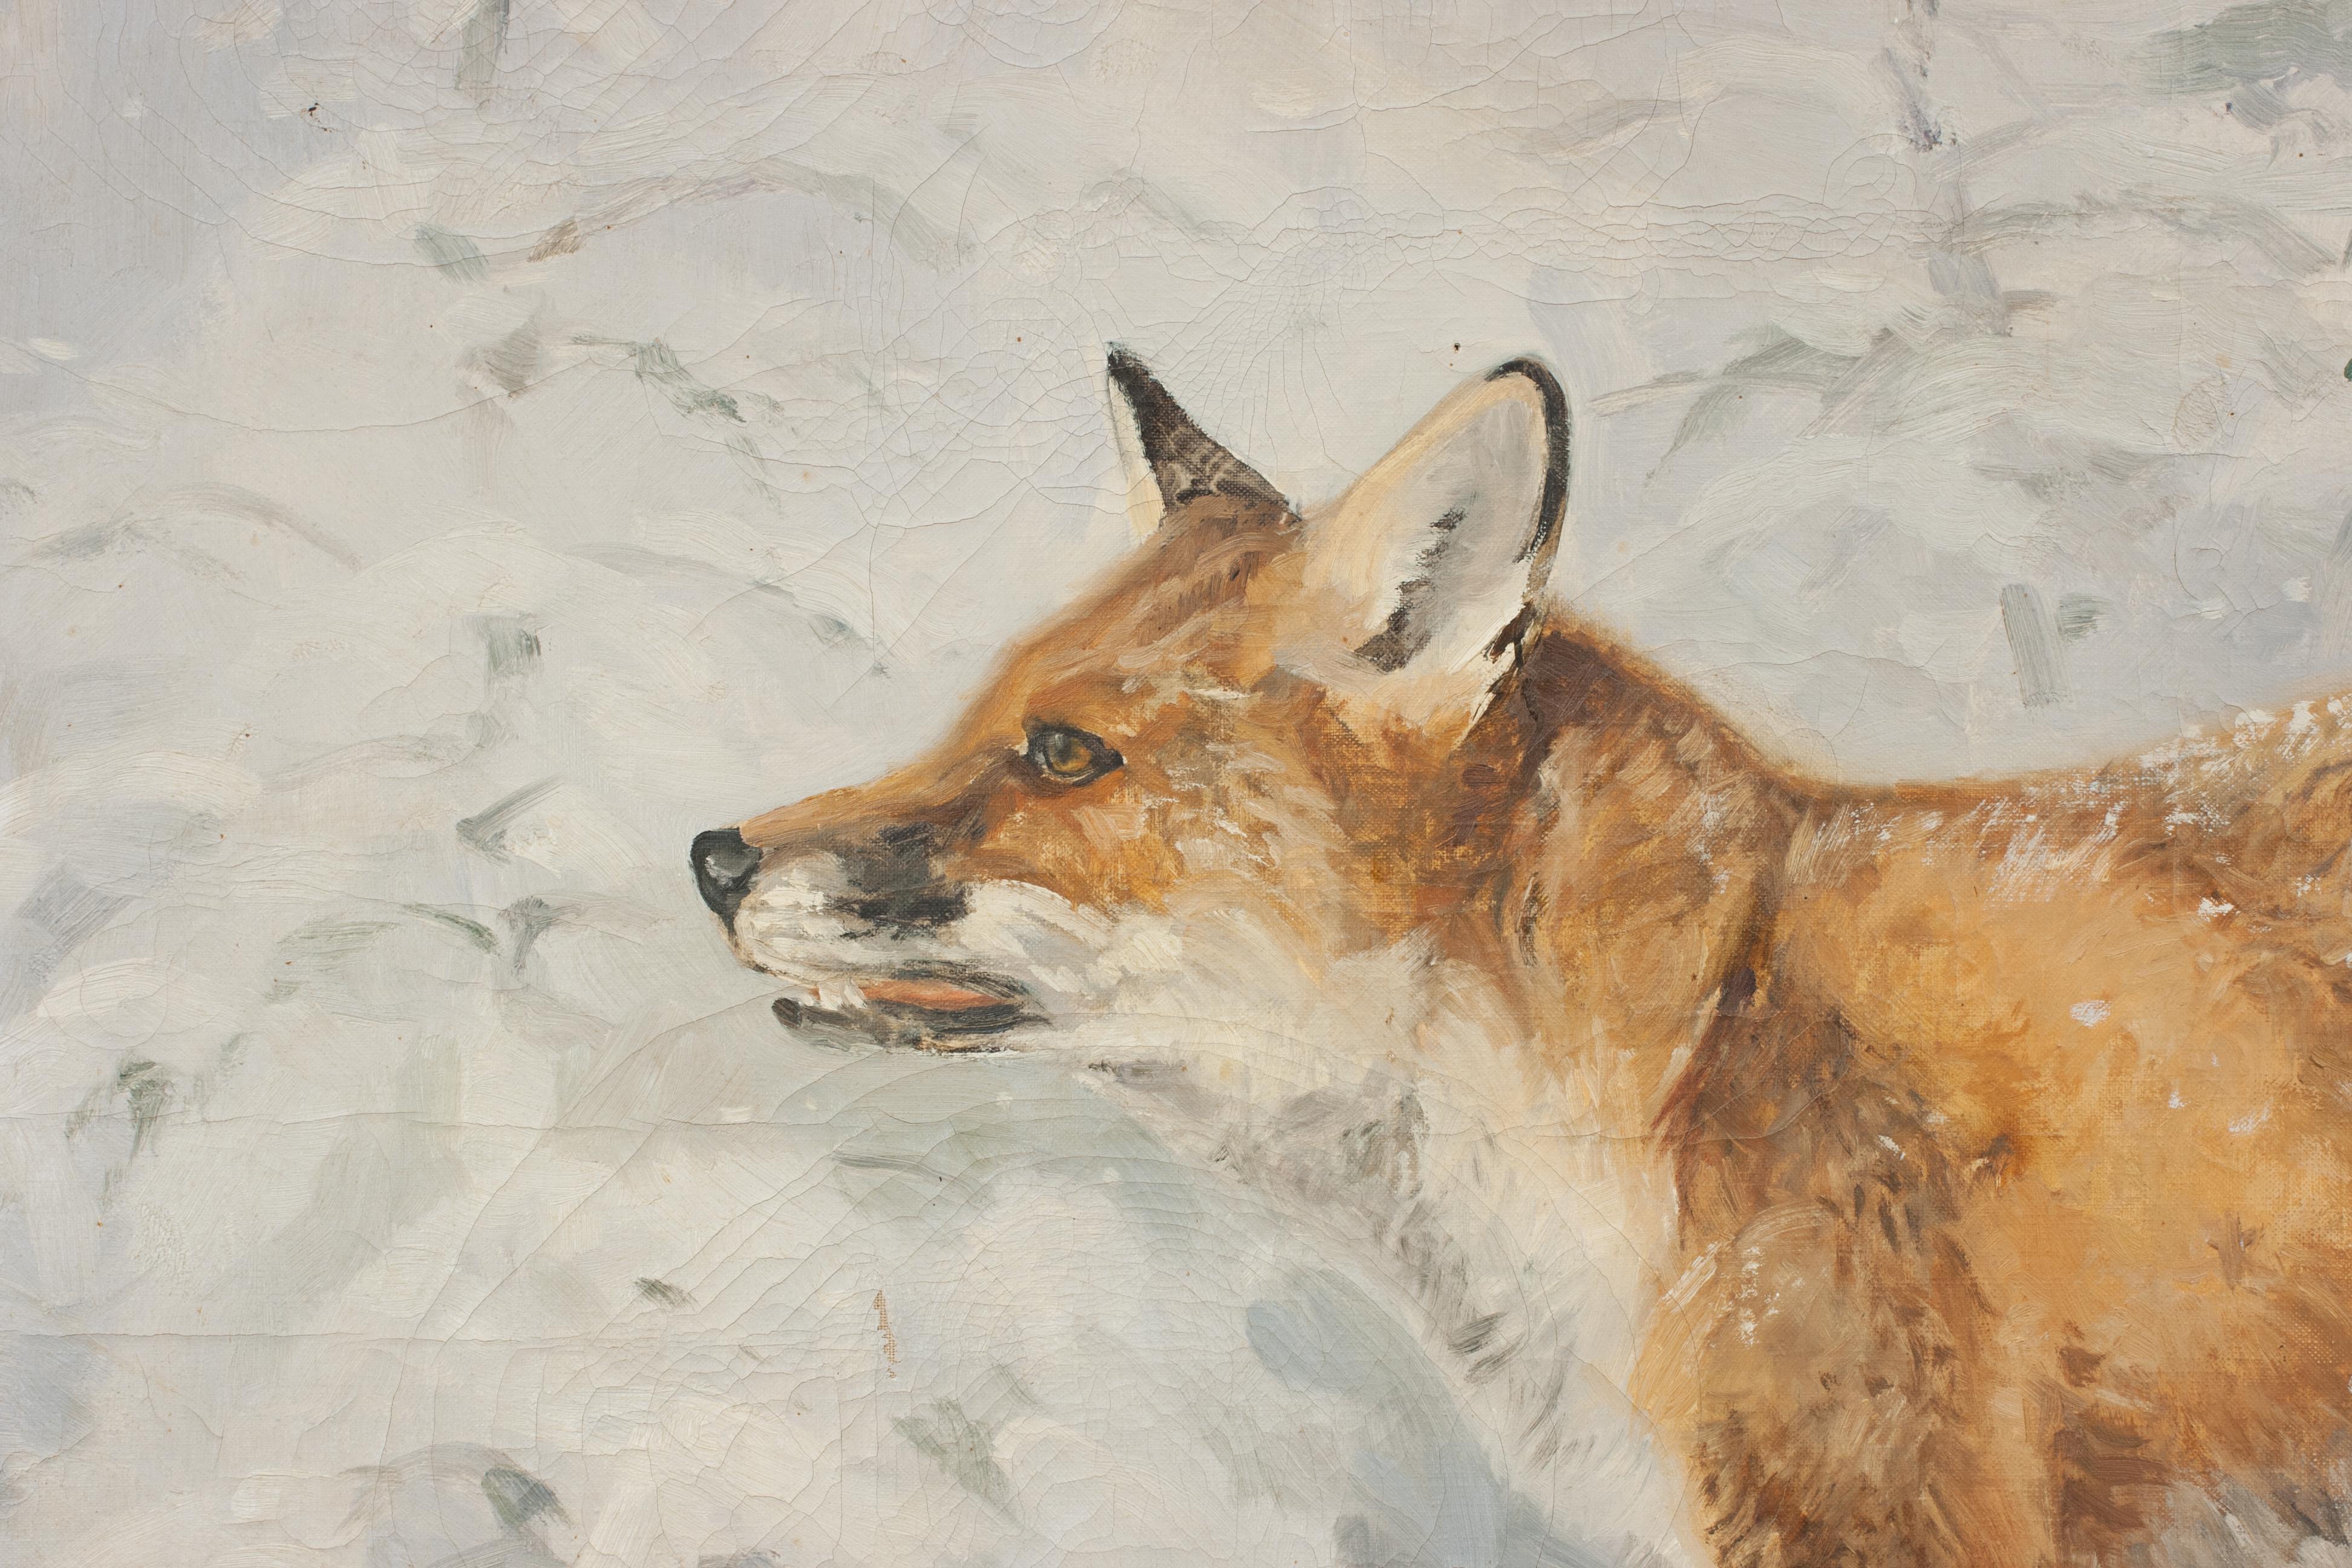 British Painting of a Fox in Winter Landscape by Jonathan Sainsbury